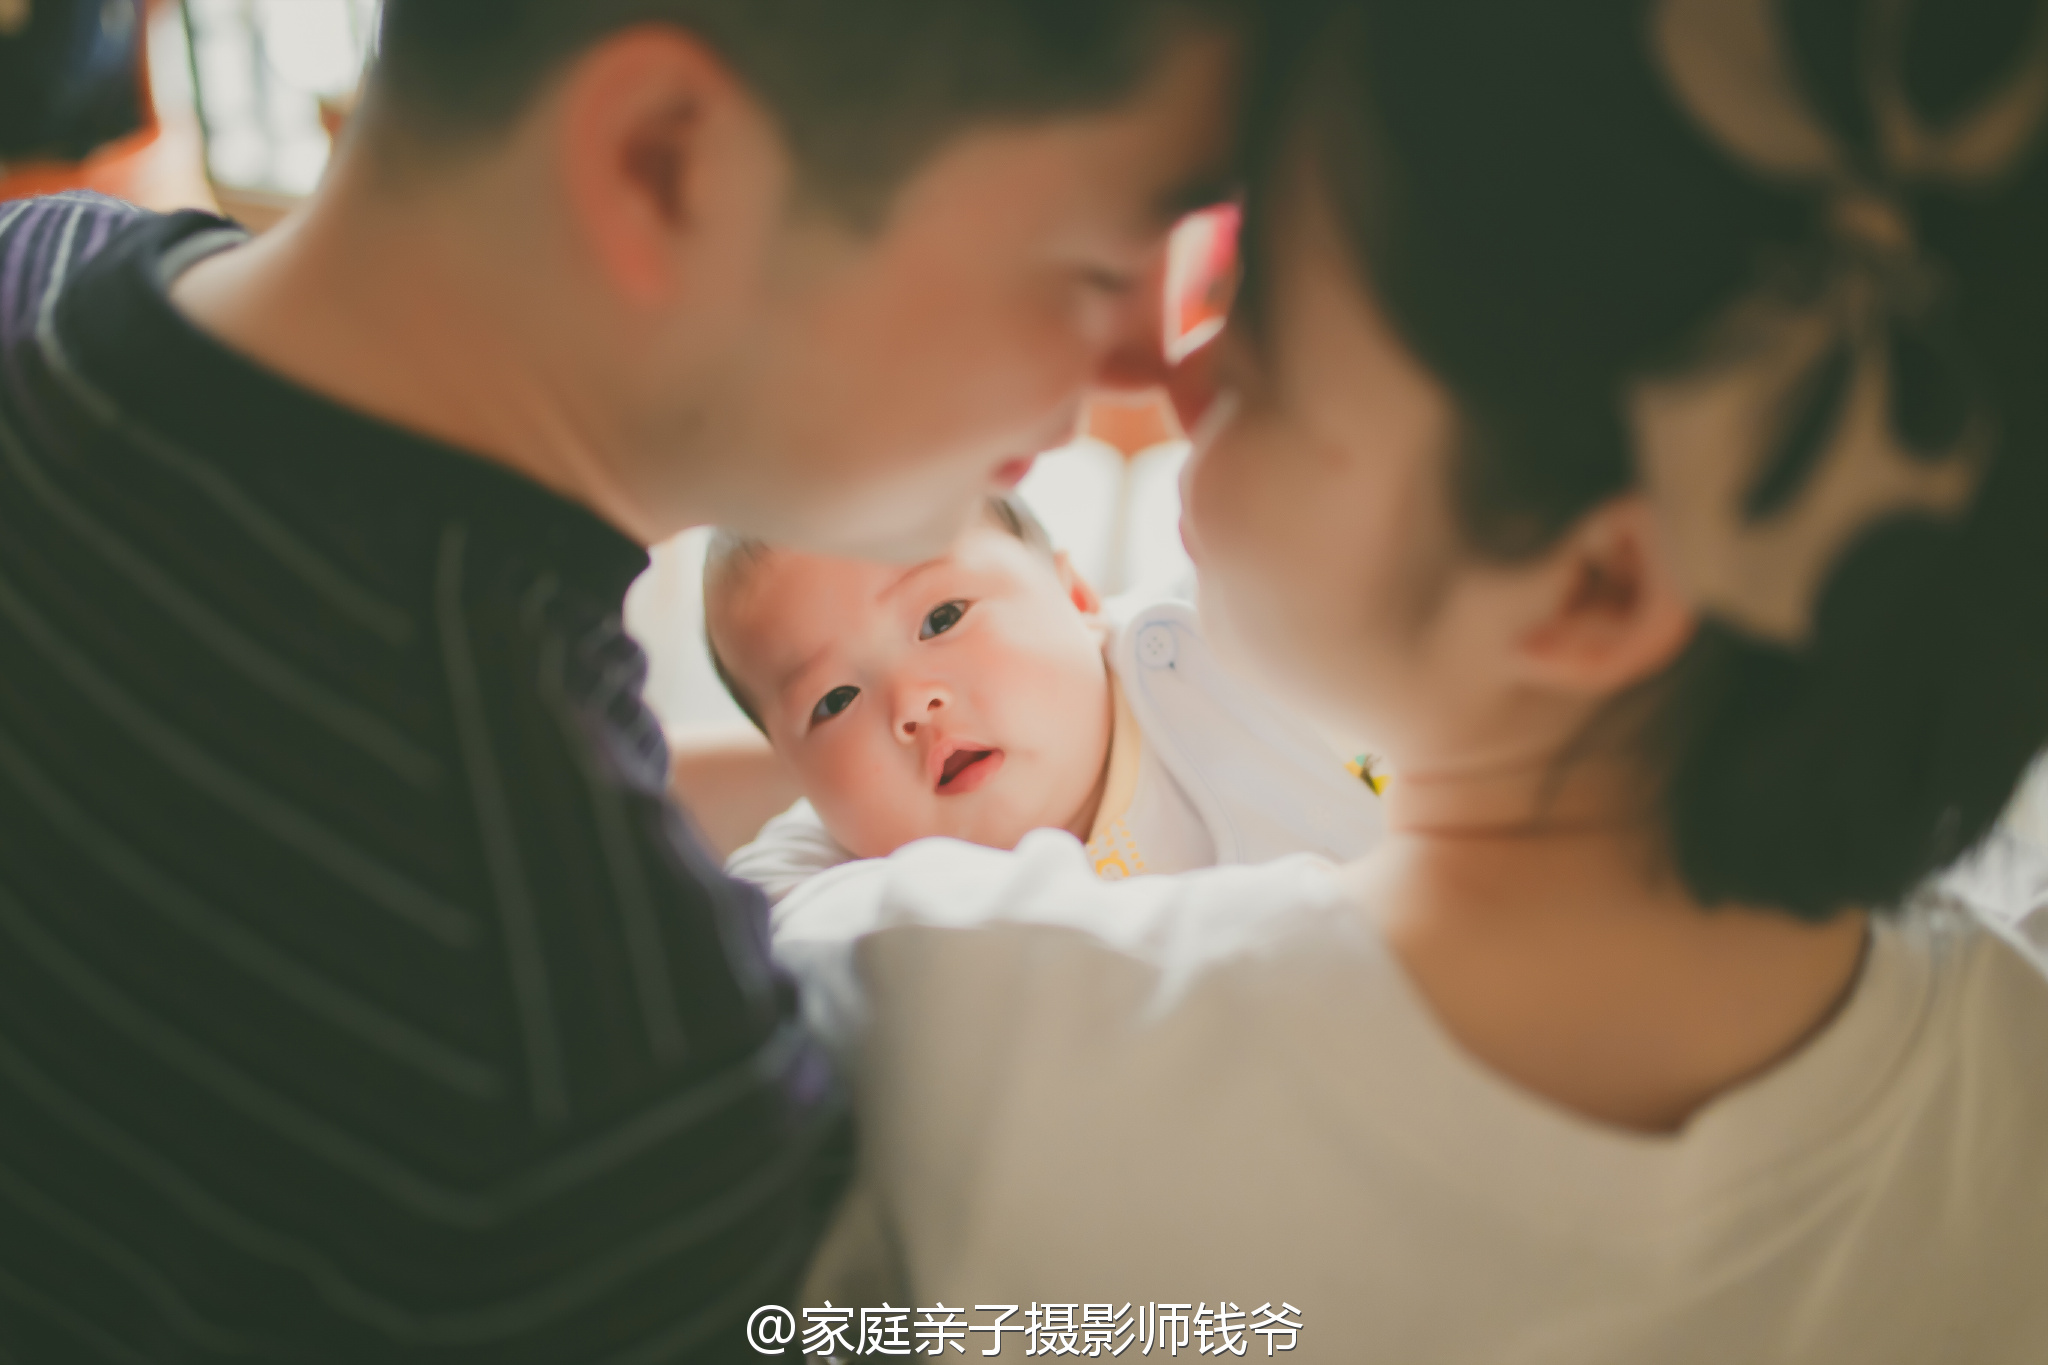 Chinese family photographer